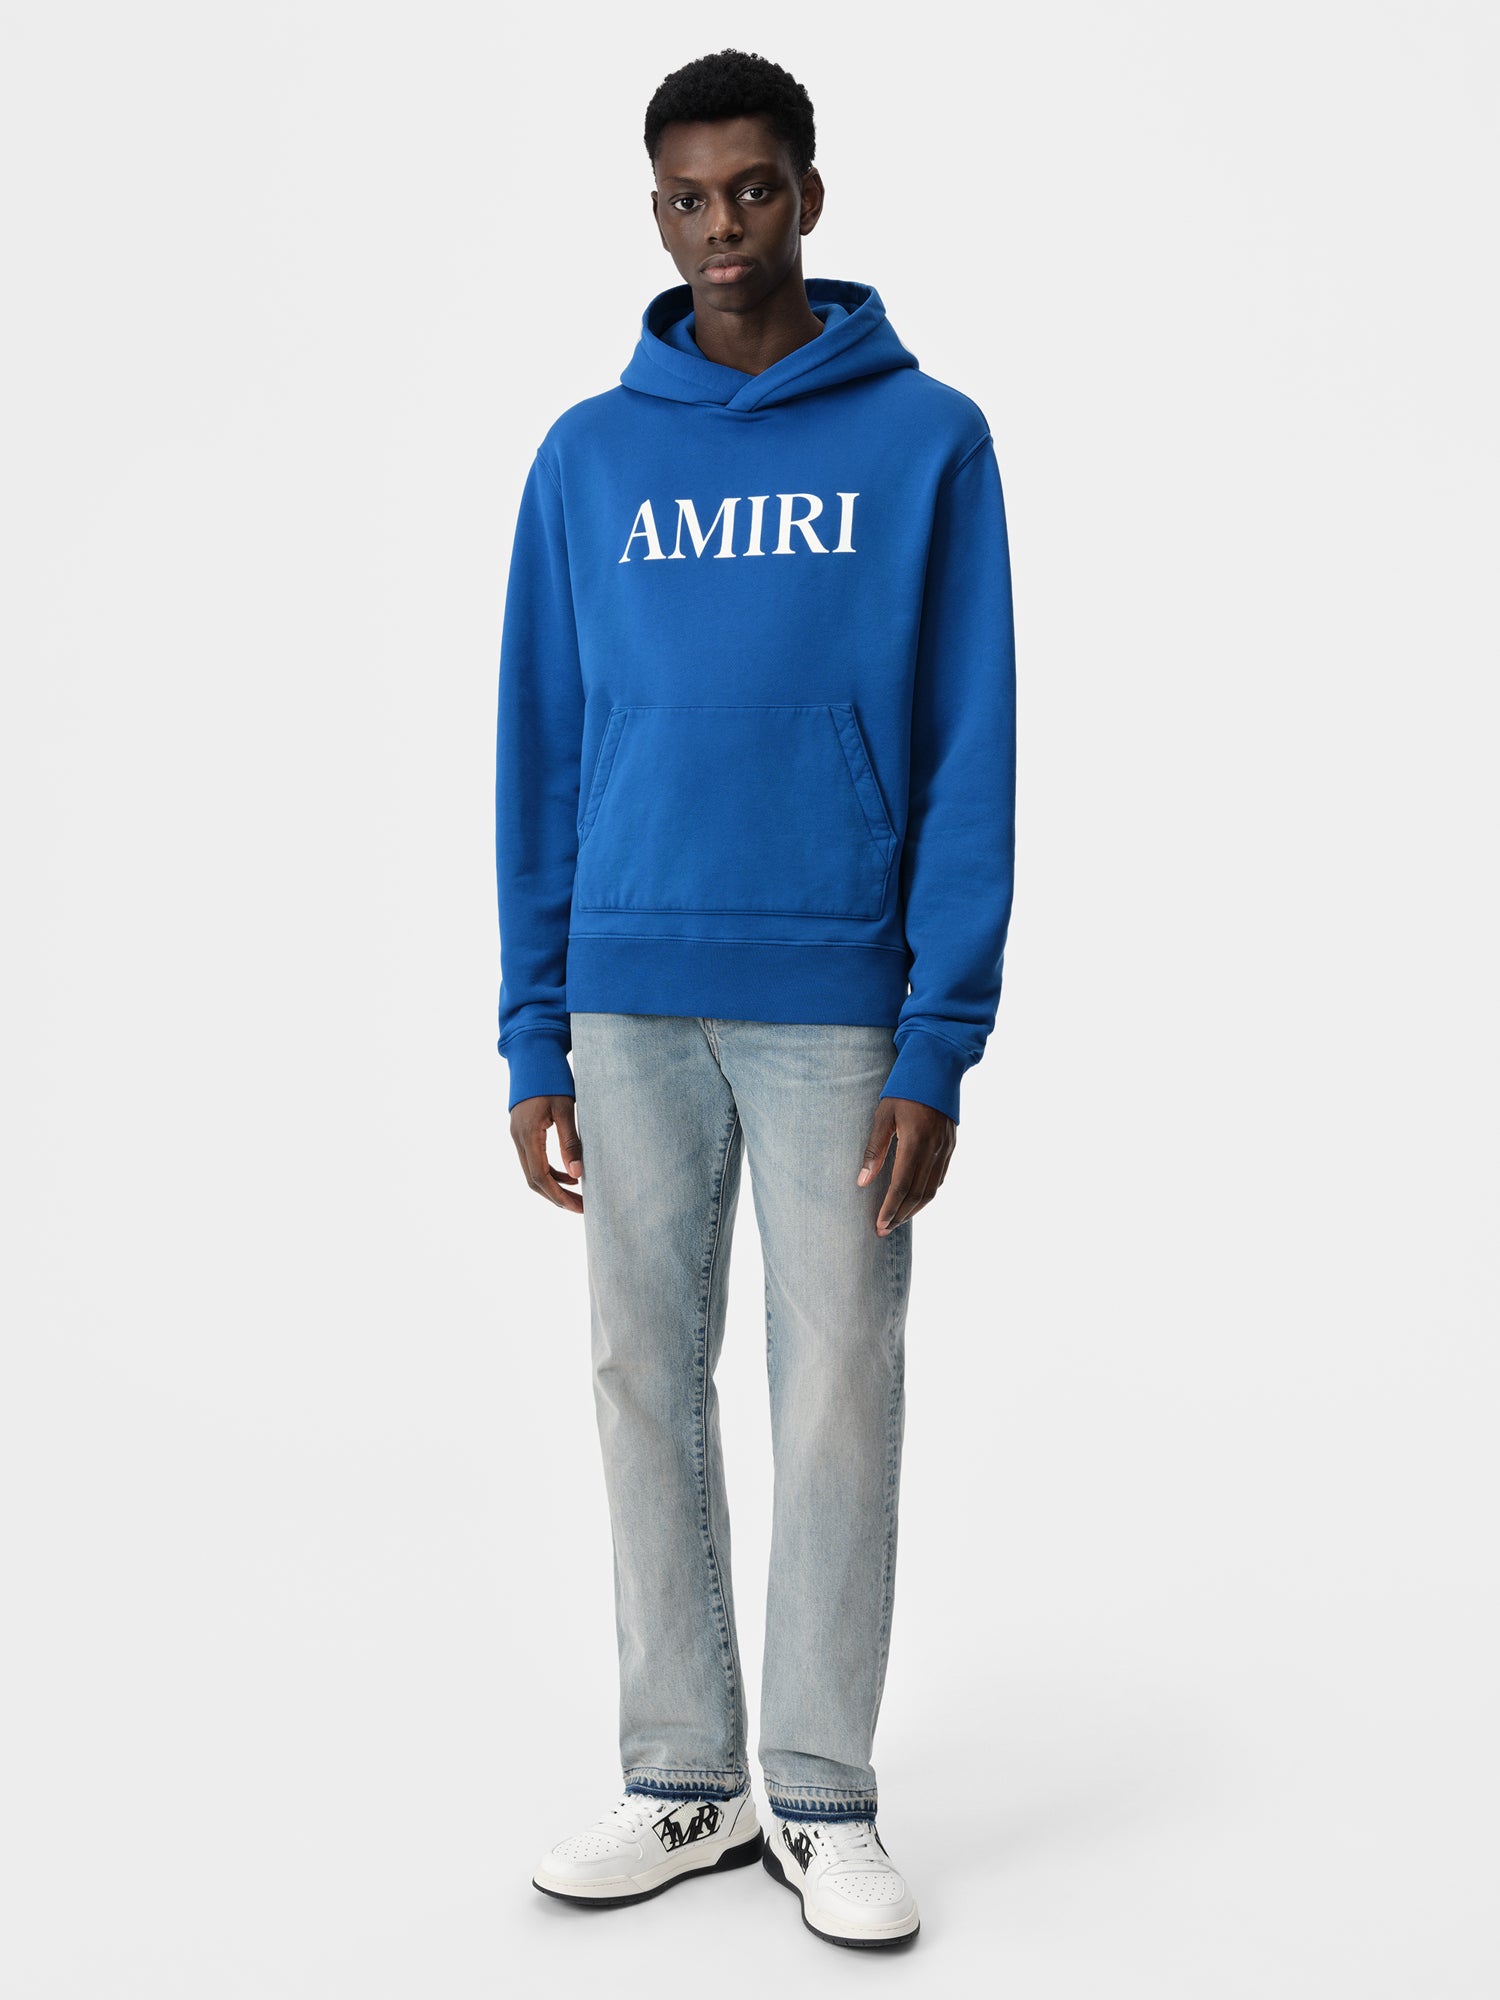 Product AMIRI CORE LOGO HOODIE - Blue featured image